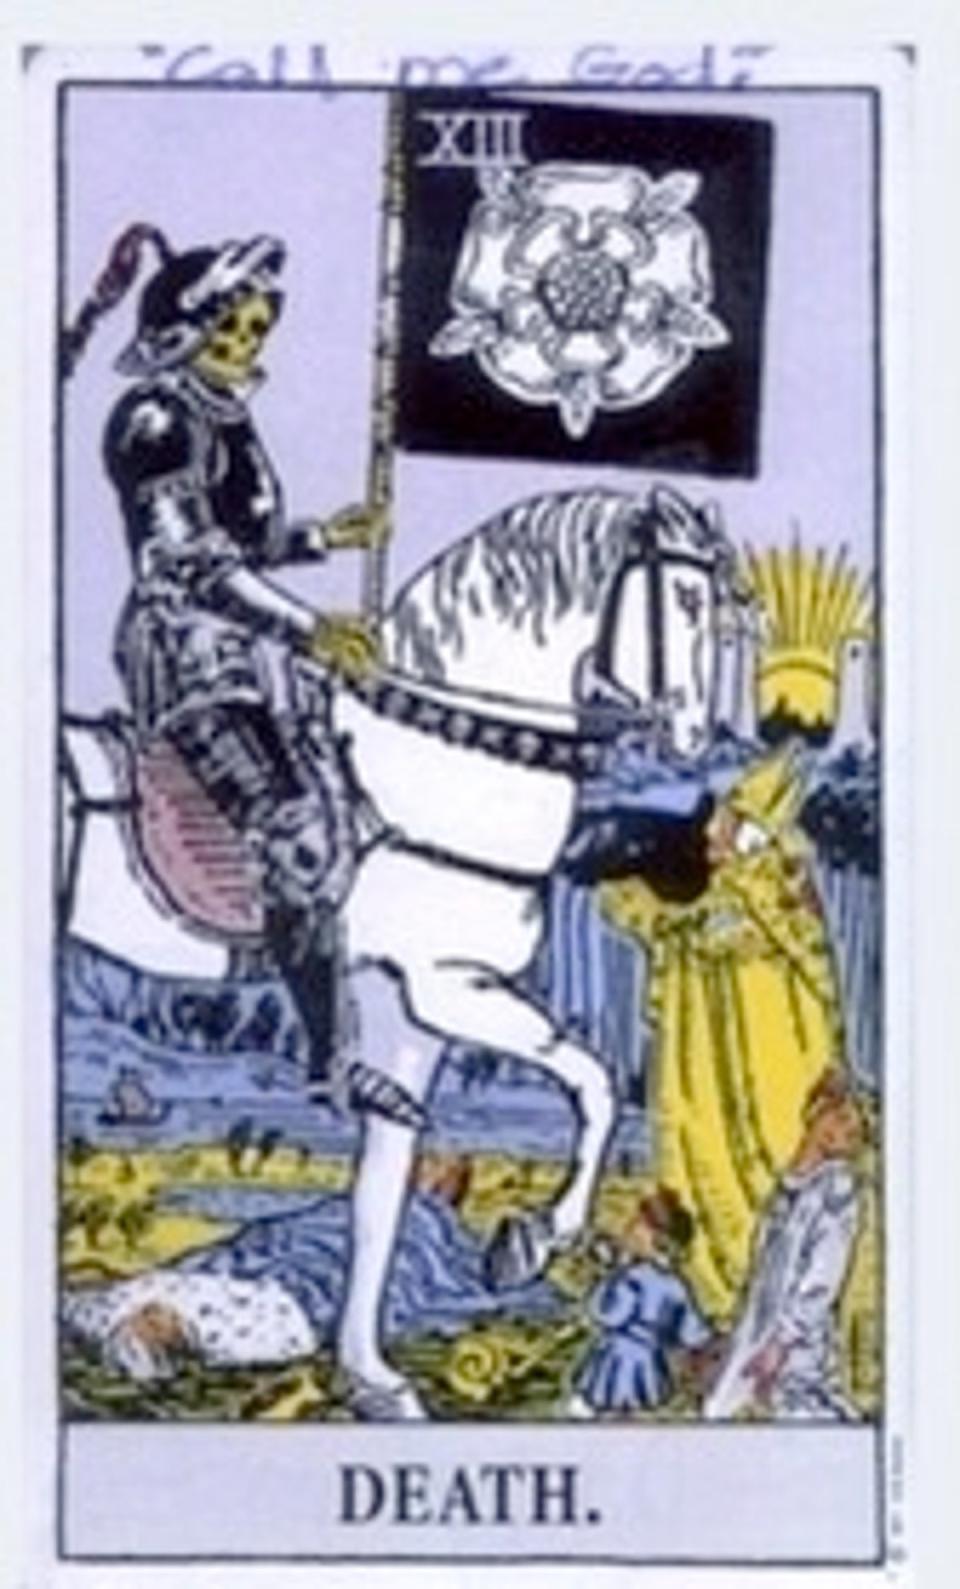 The DC Snipers left this tarot card at one of the crime scenes (FBI)